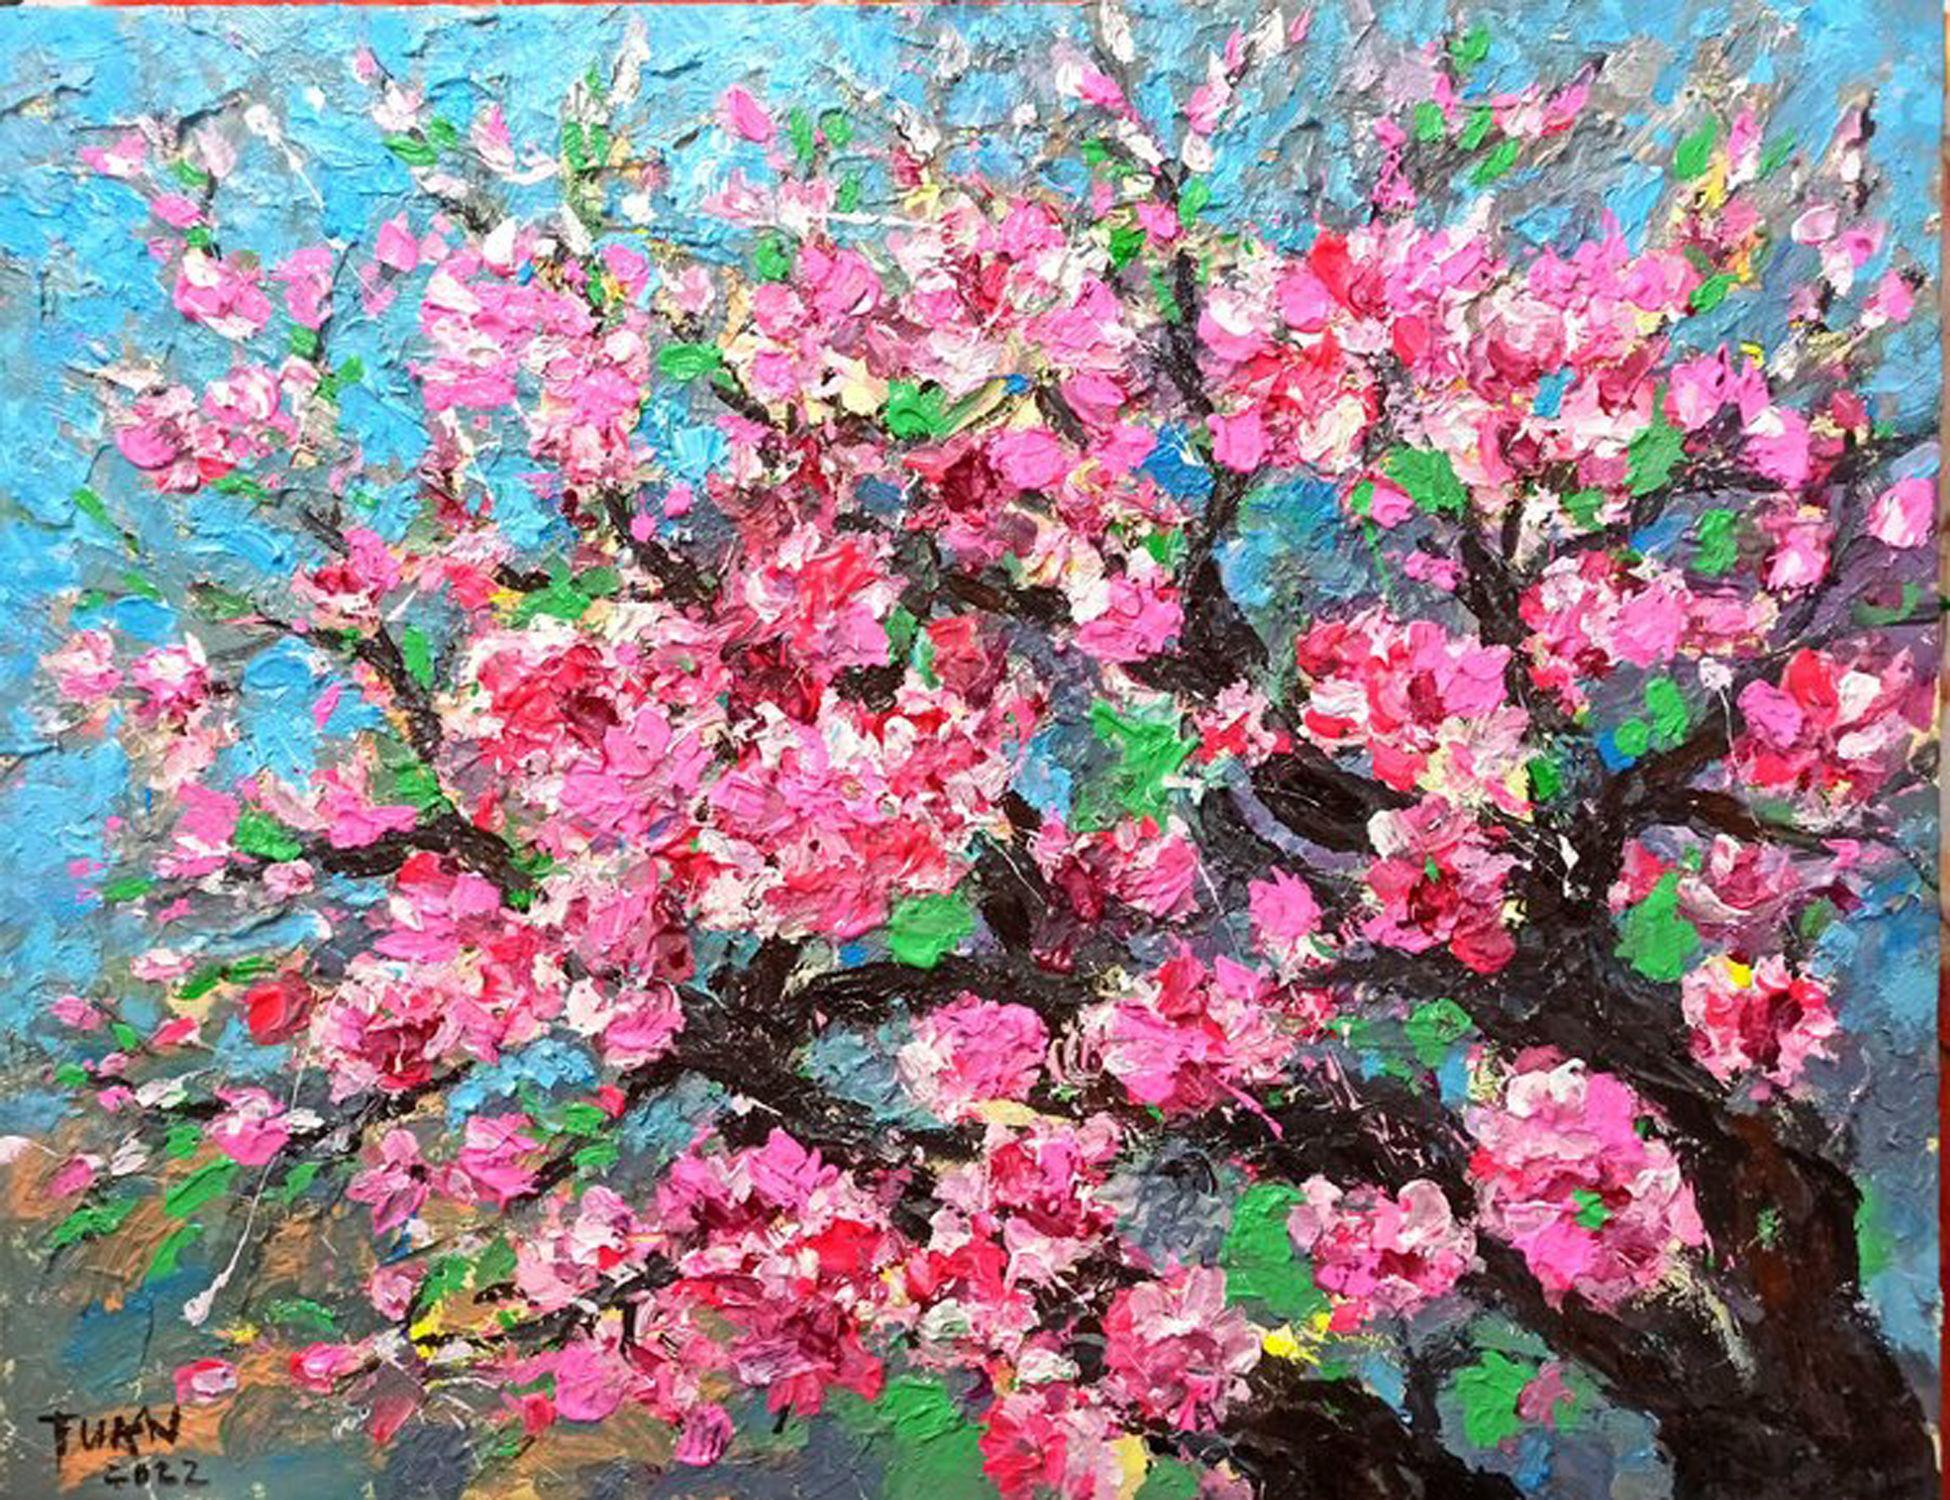 Peach blossom is the most beautiful and popular flower in the North of Vietnam, loved by many people and displayed during Tet.  Peach tree is considered the quintessence of the Five Elements, according to feng shui this tree can cure all demons, so